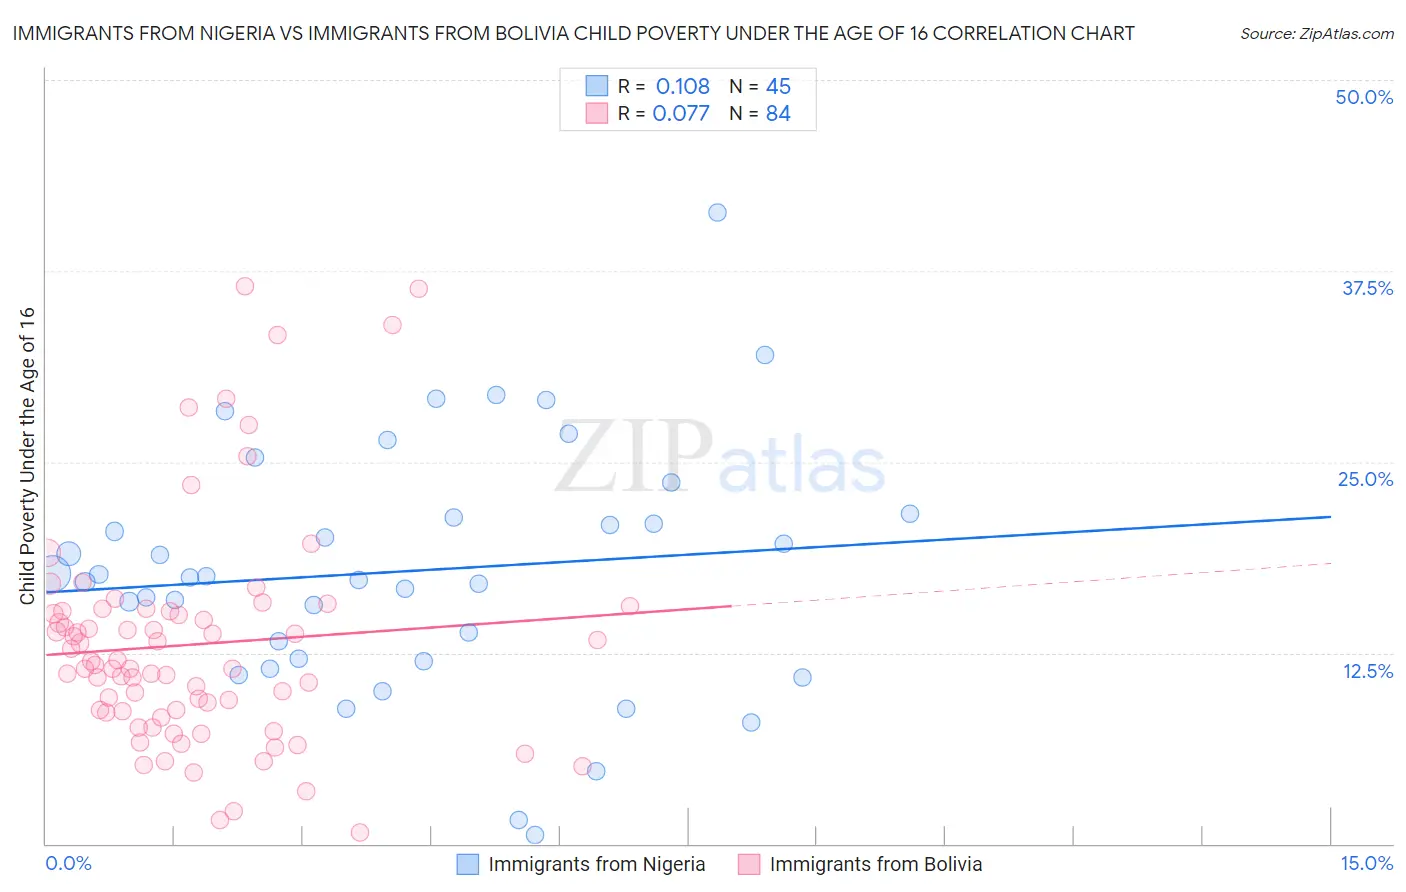 Immigrants from Nigeria vs Immigrants from Bolivia Child Poverty Under the Age of 16